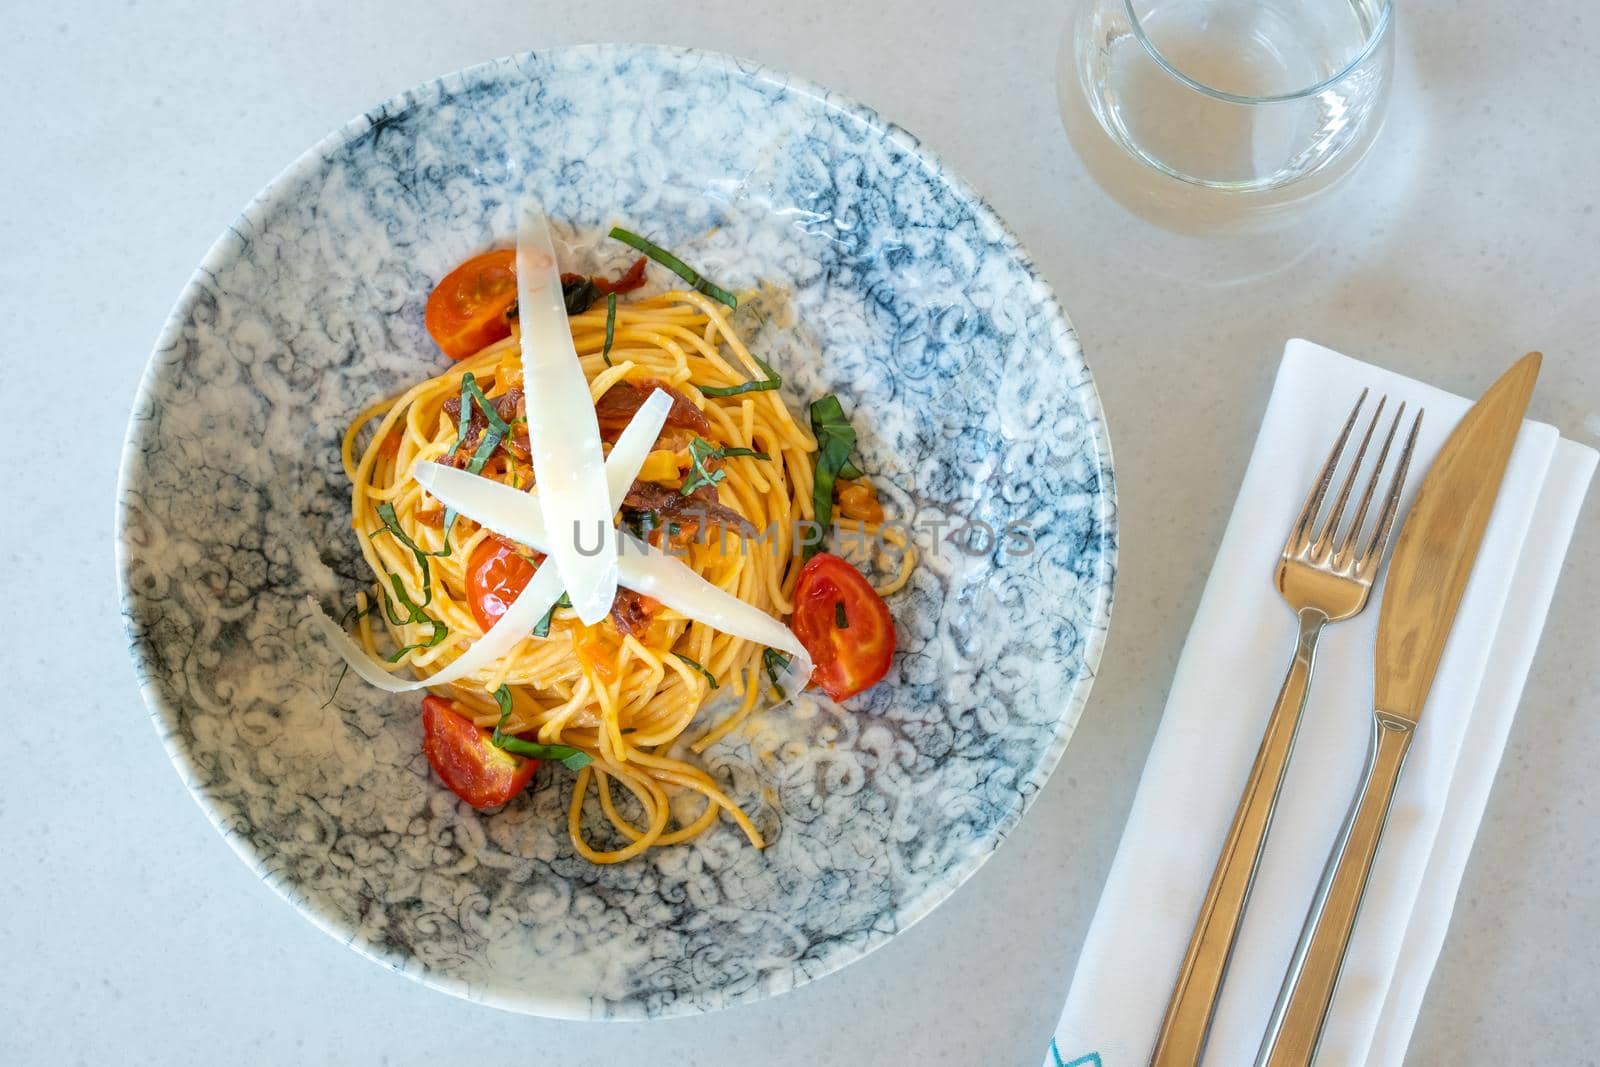 Spaghetti with a spicy sauce, chili pepper and grated parmesan cheese by Sonat